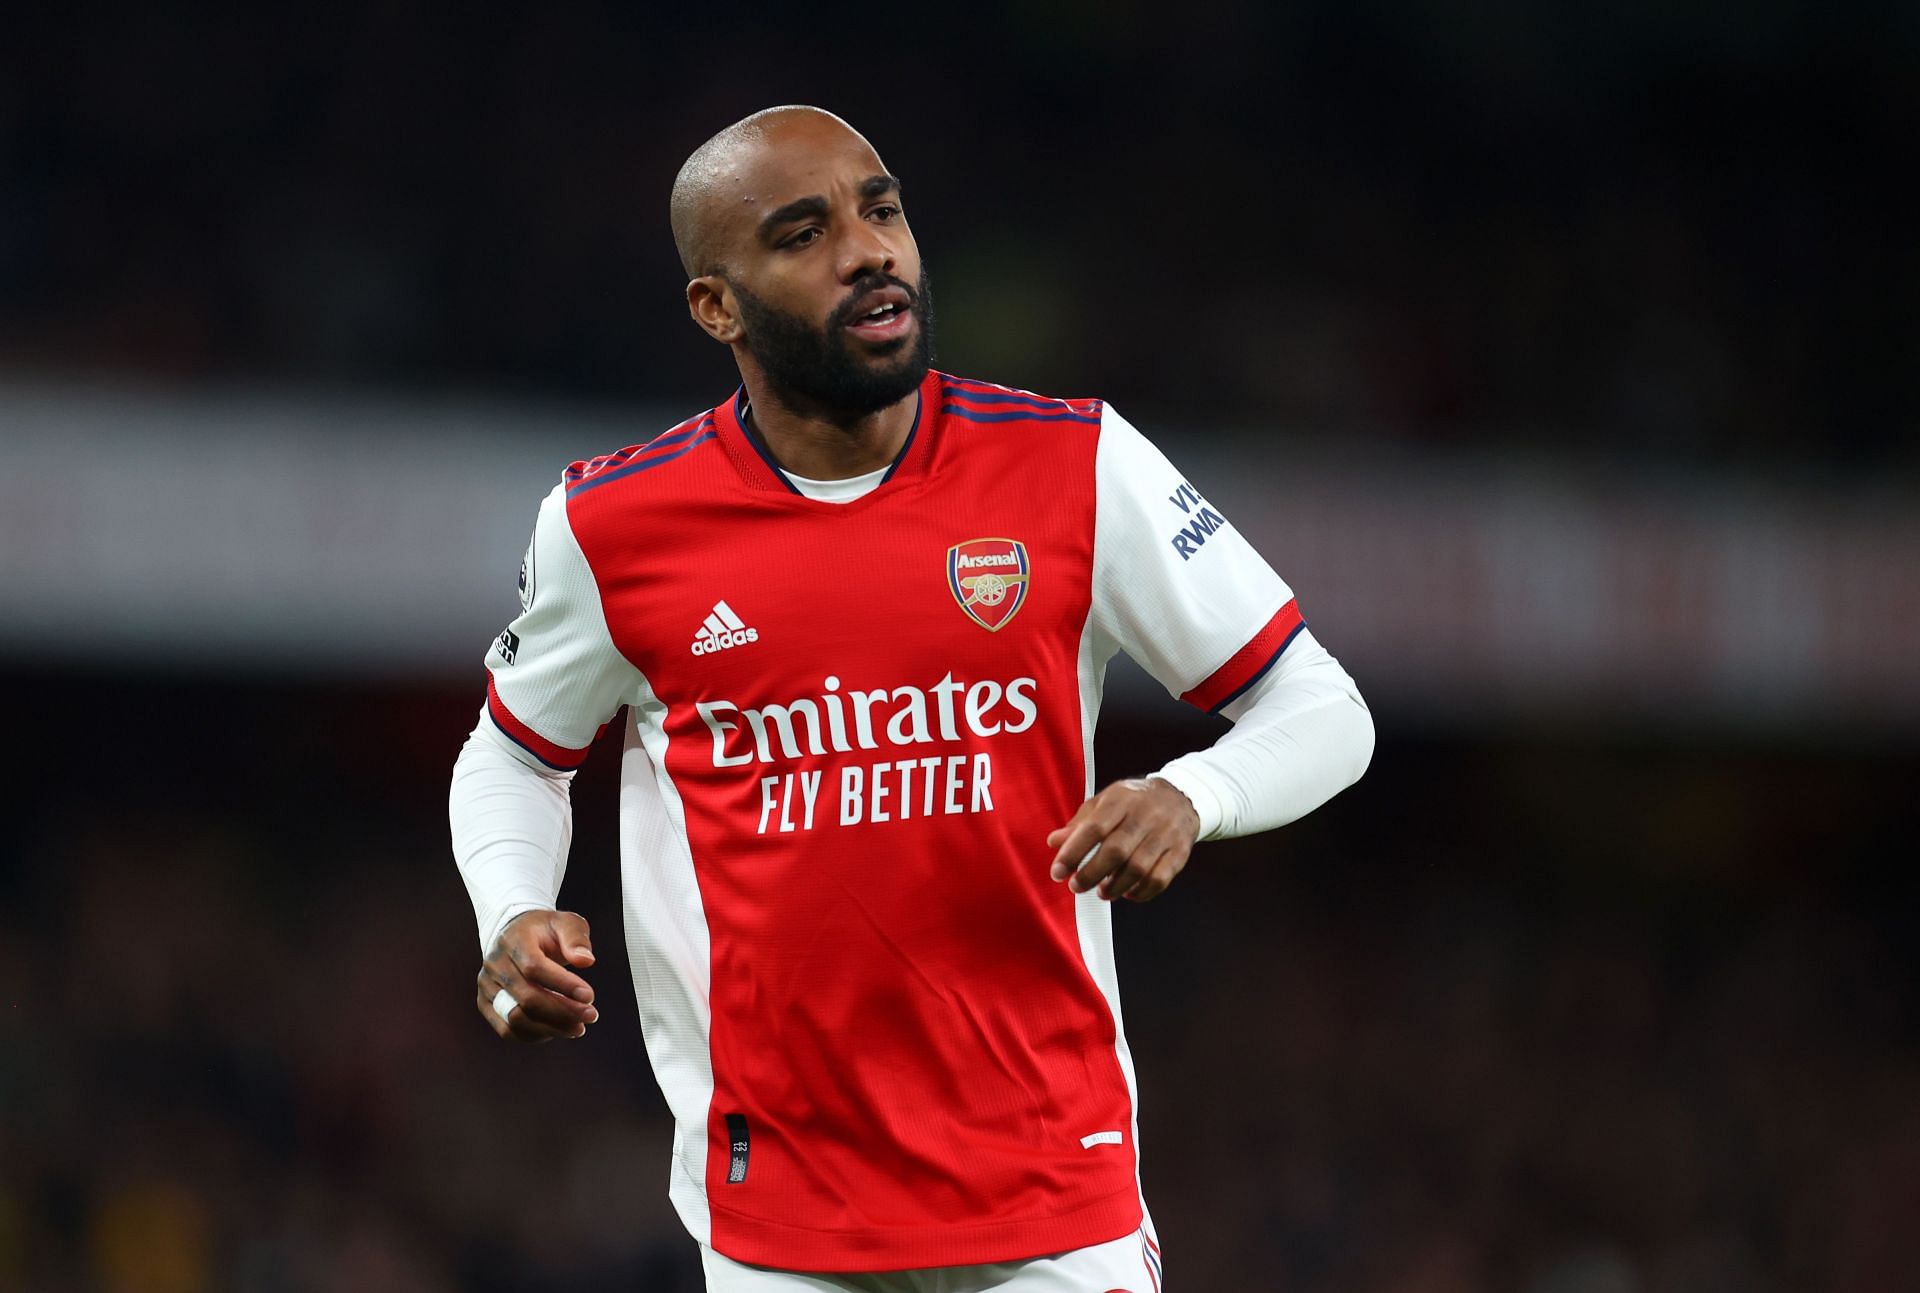 Arsenal have informed Barcelona they have to pay &euro;10 million for Alexandre Lacazette.